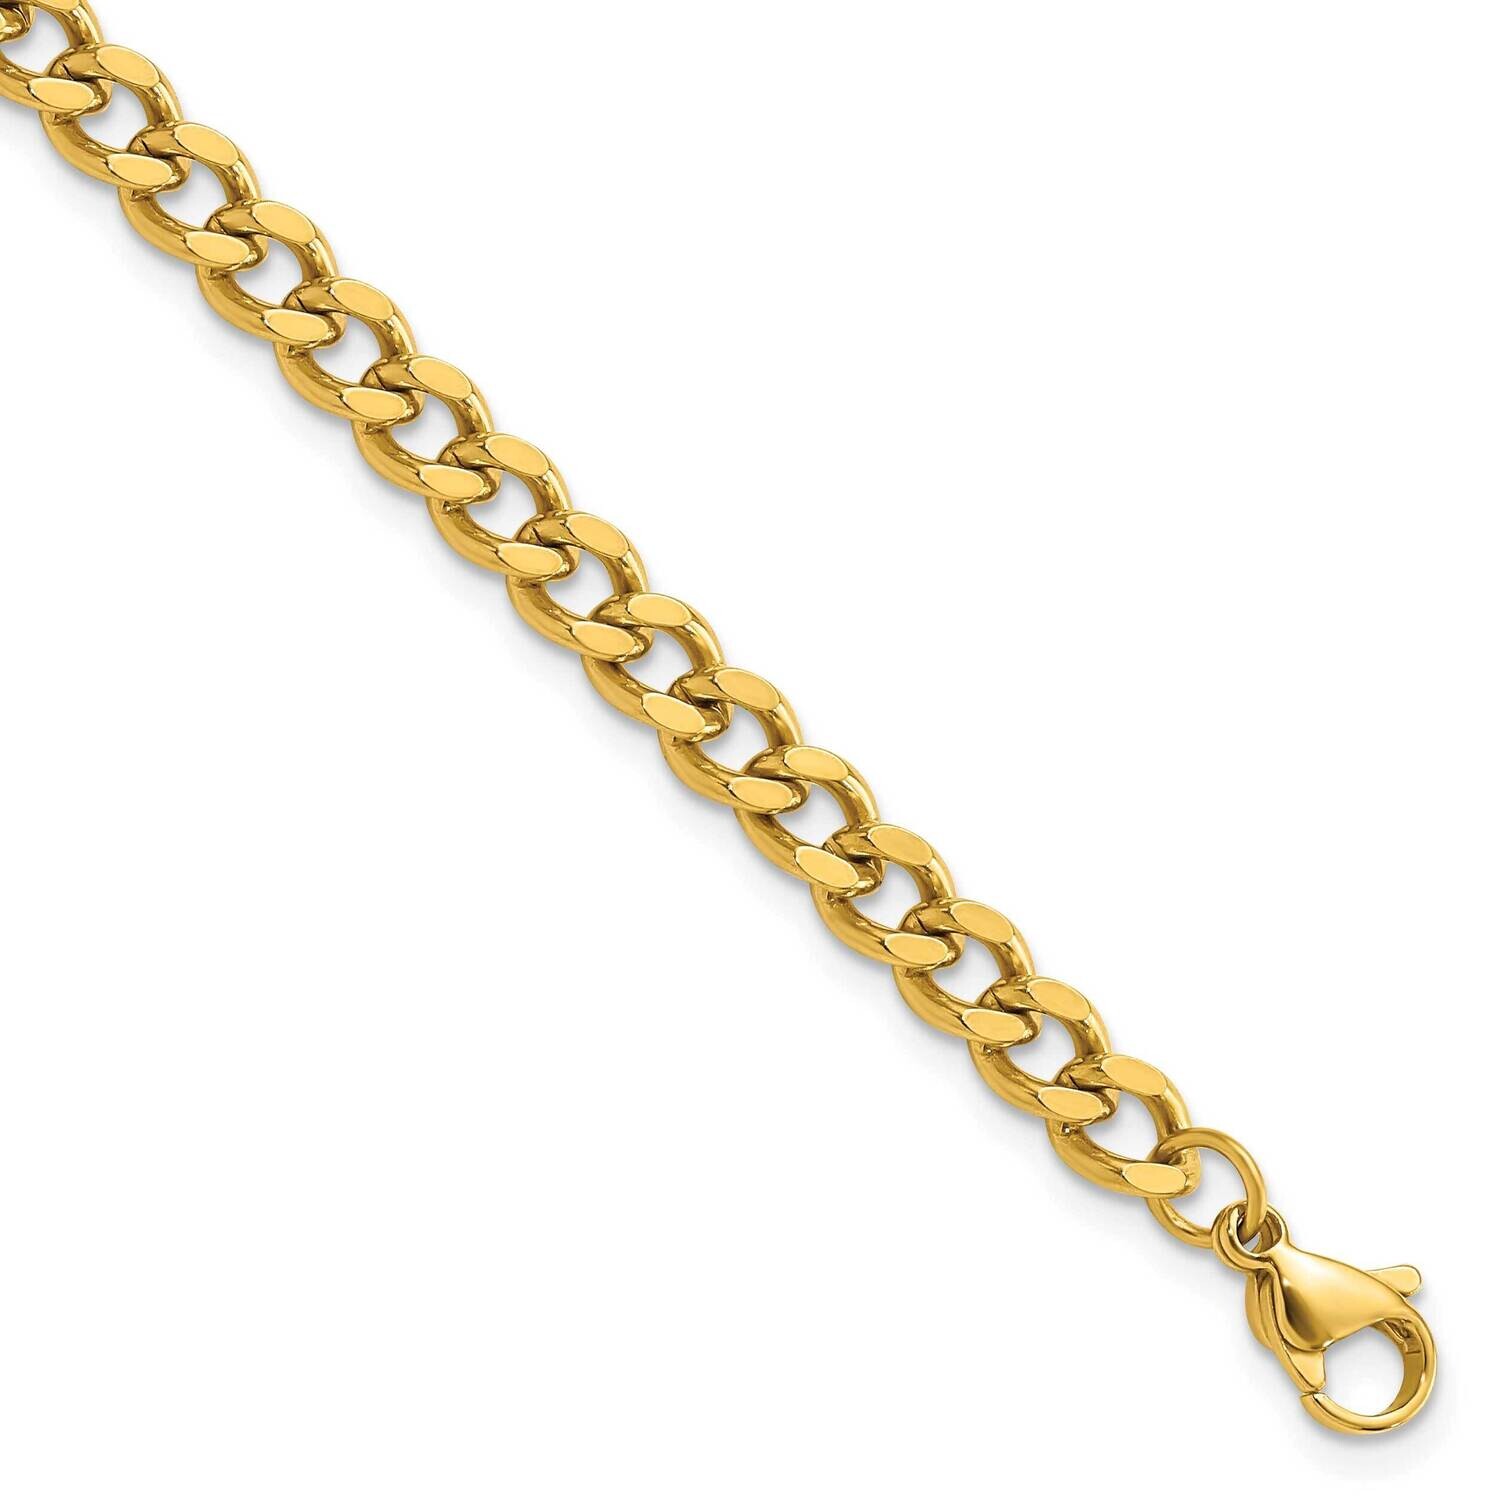 Chisel Polished Yellow Ip-Plated 5mm 8.5 Inch Curb Chain Bracelet Stainless Steel SRB3046-8.5